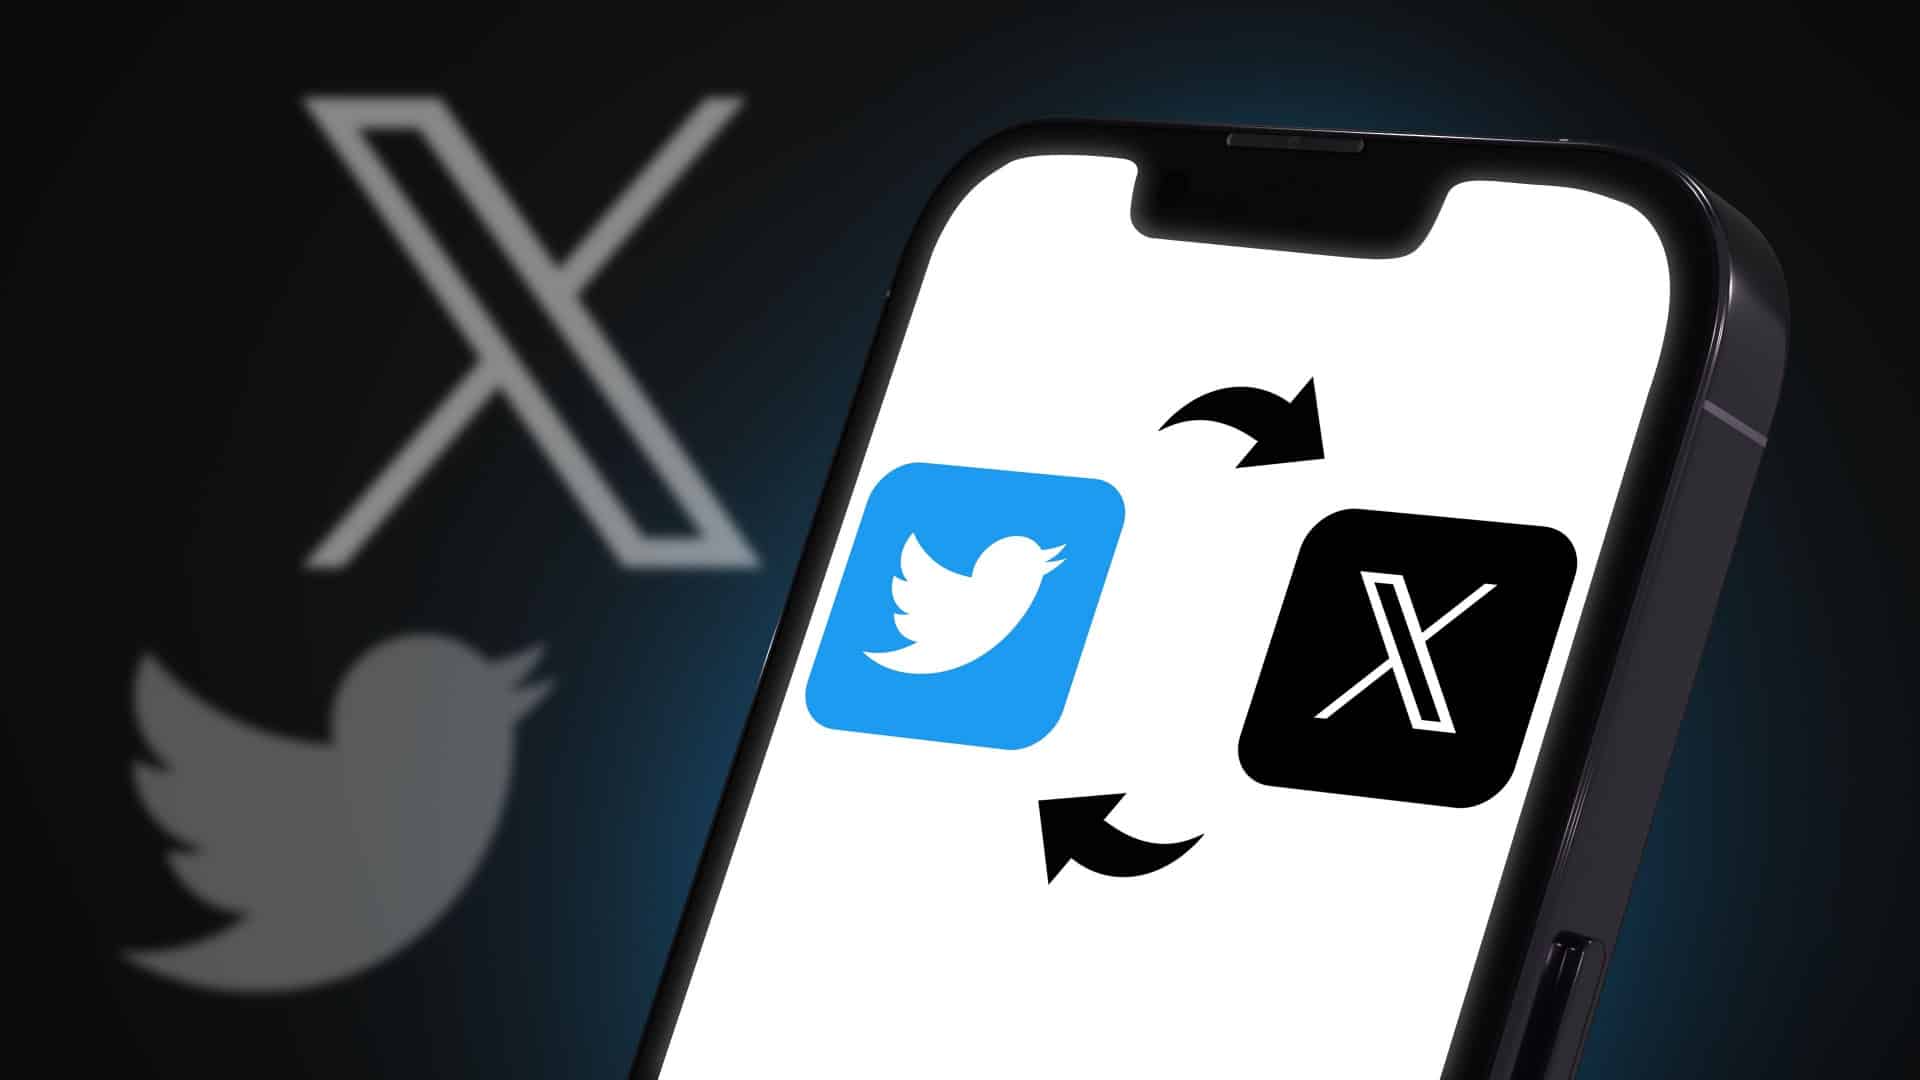 Twitter is now brand X